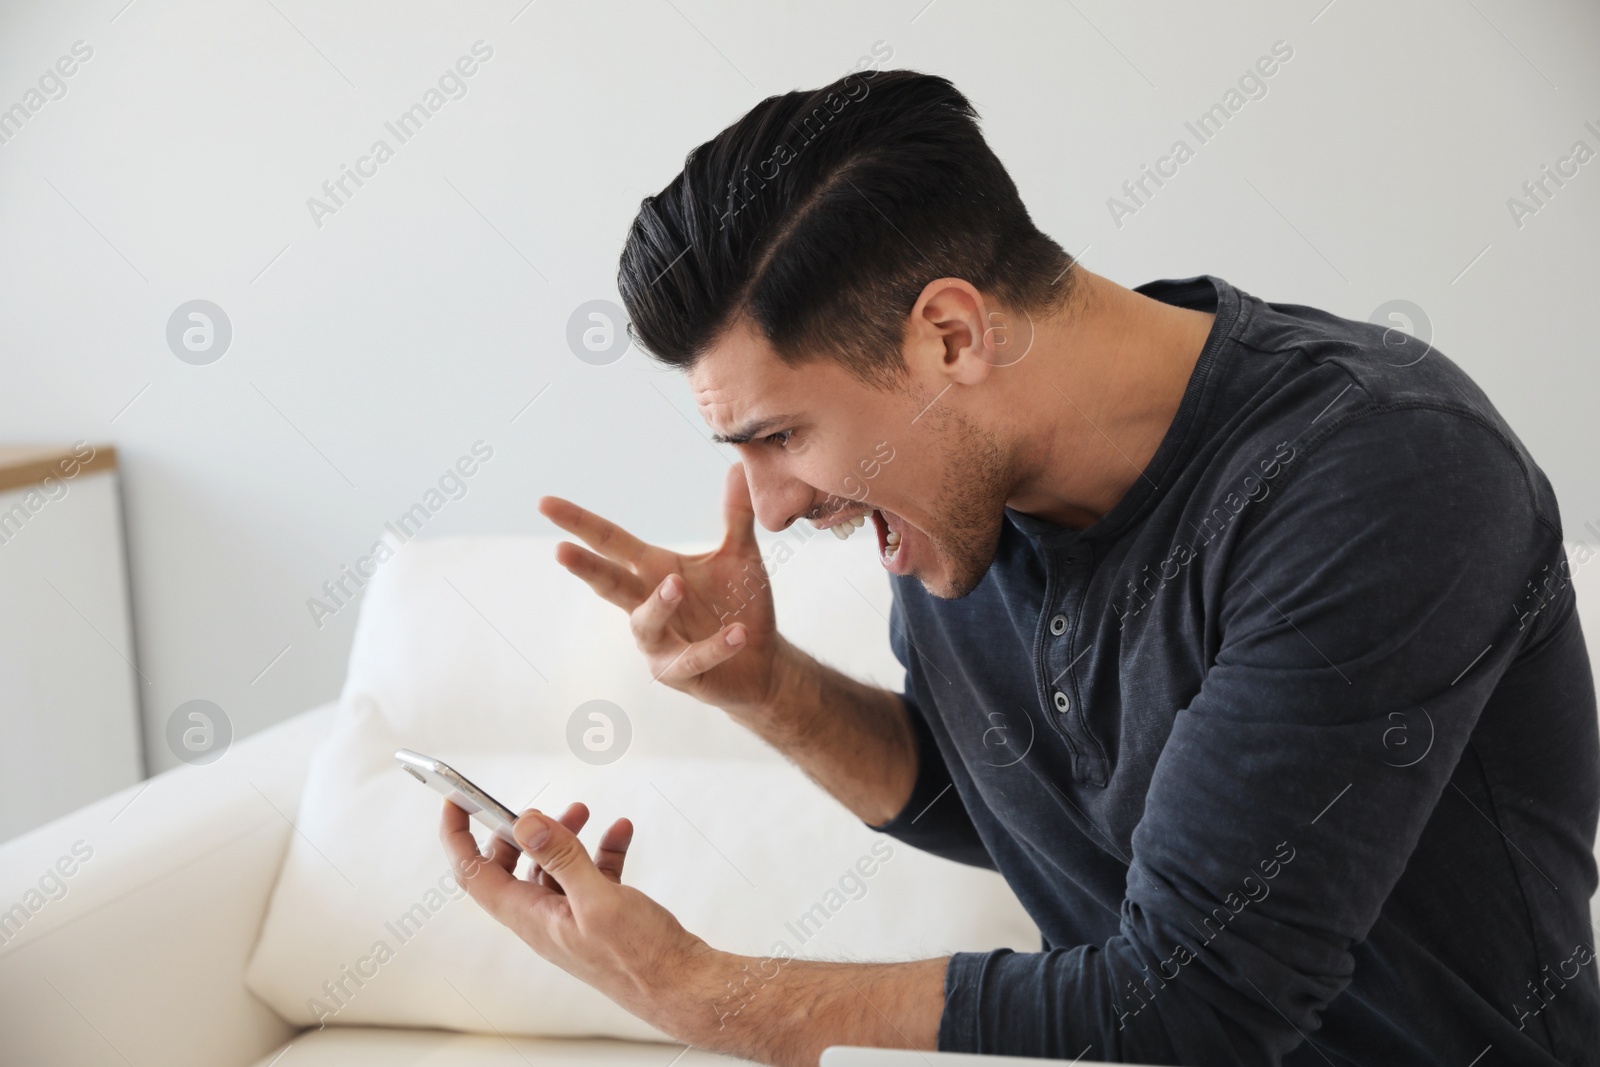 Photo of Emotional man shouting at smartphone in room